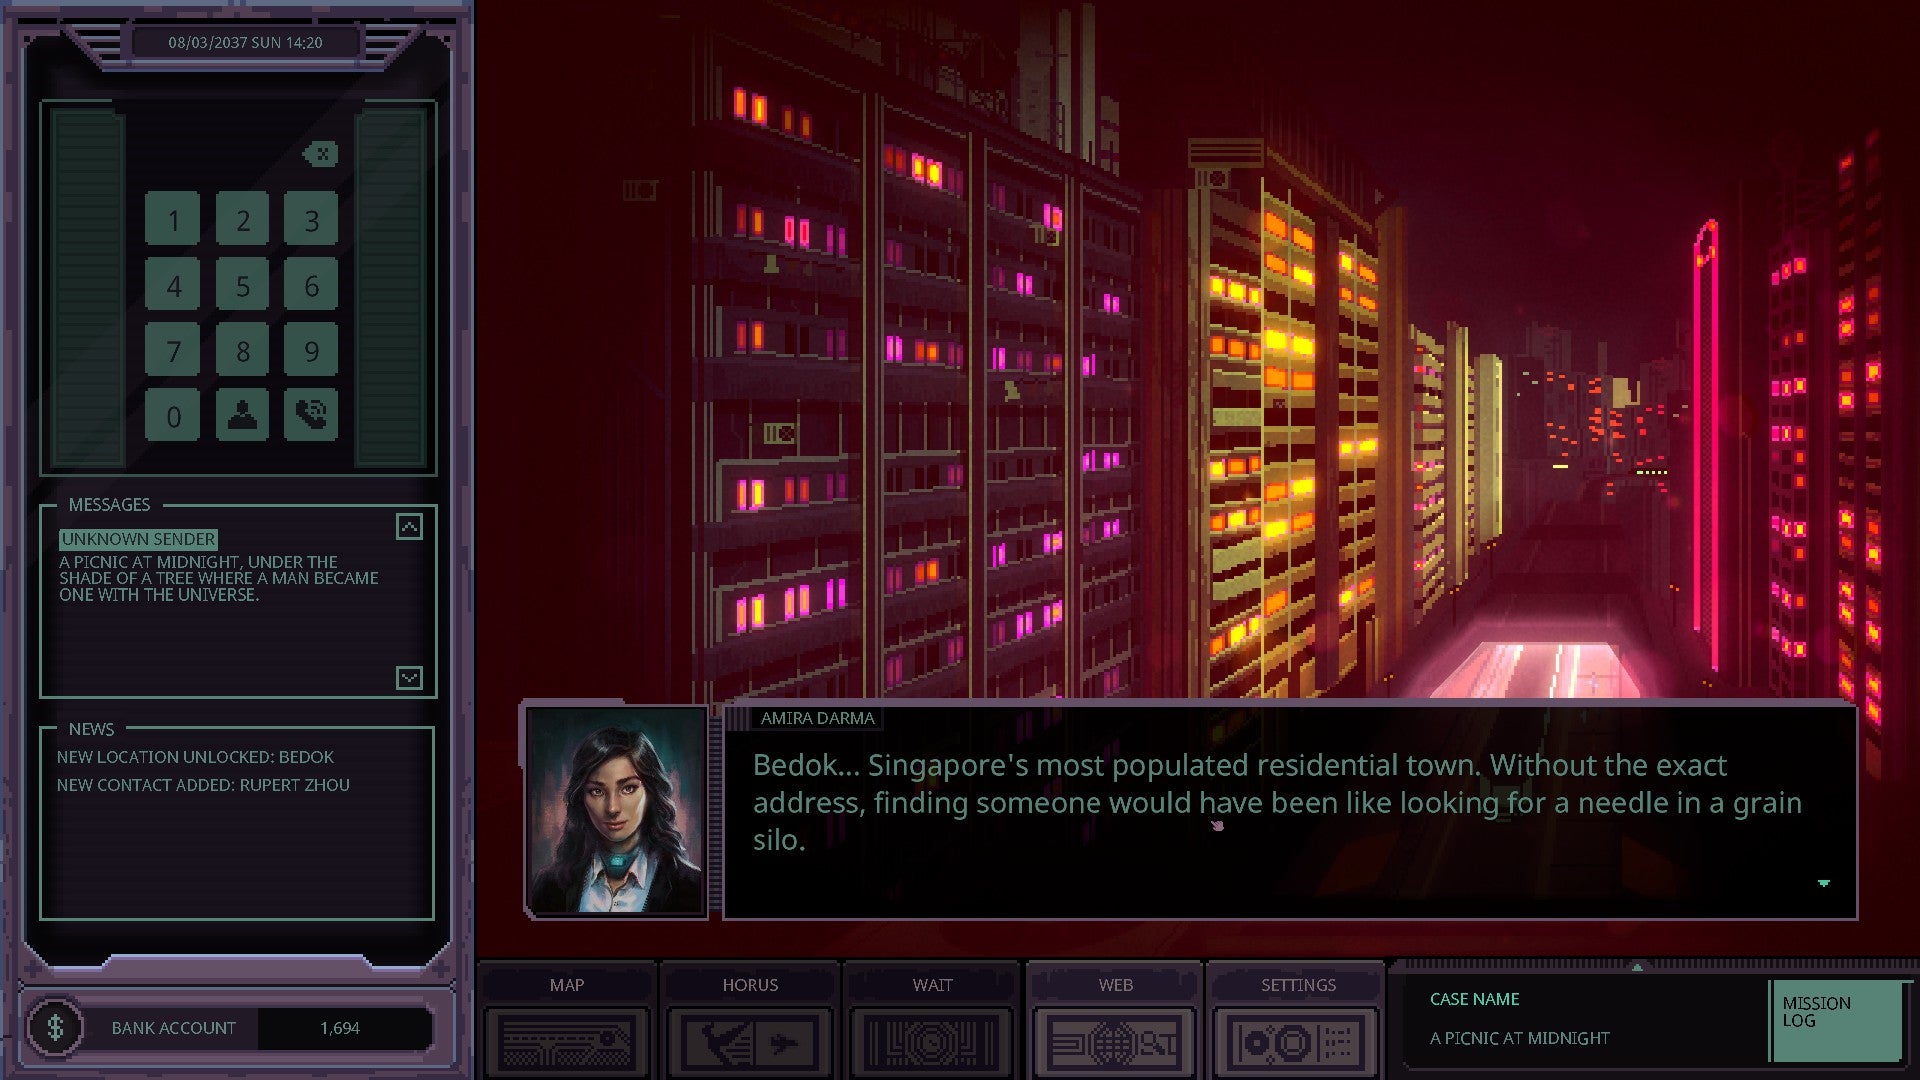 The Chinatown Detective Agency is reviewing screenshots showing the game's left-aligned UI overlay, pixel-art center pane, cyber-noir vistas, and snapshots of detective dialogue.